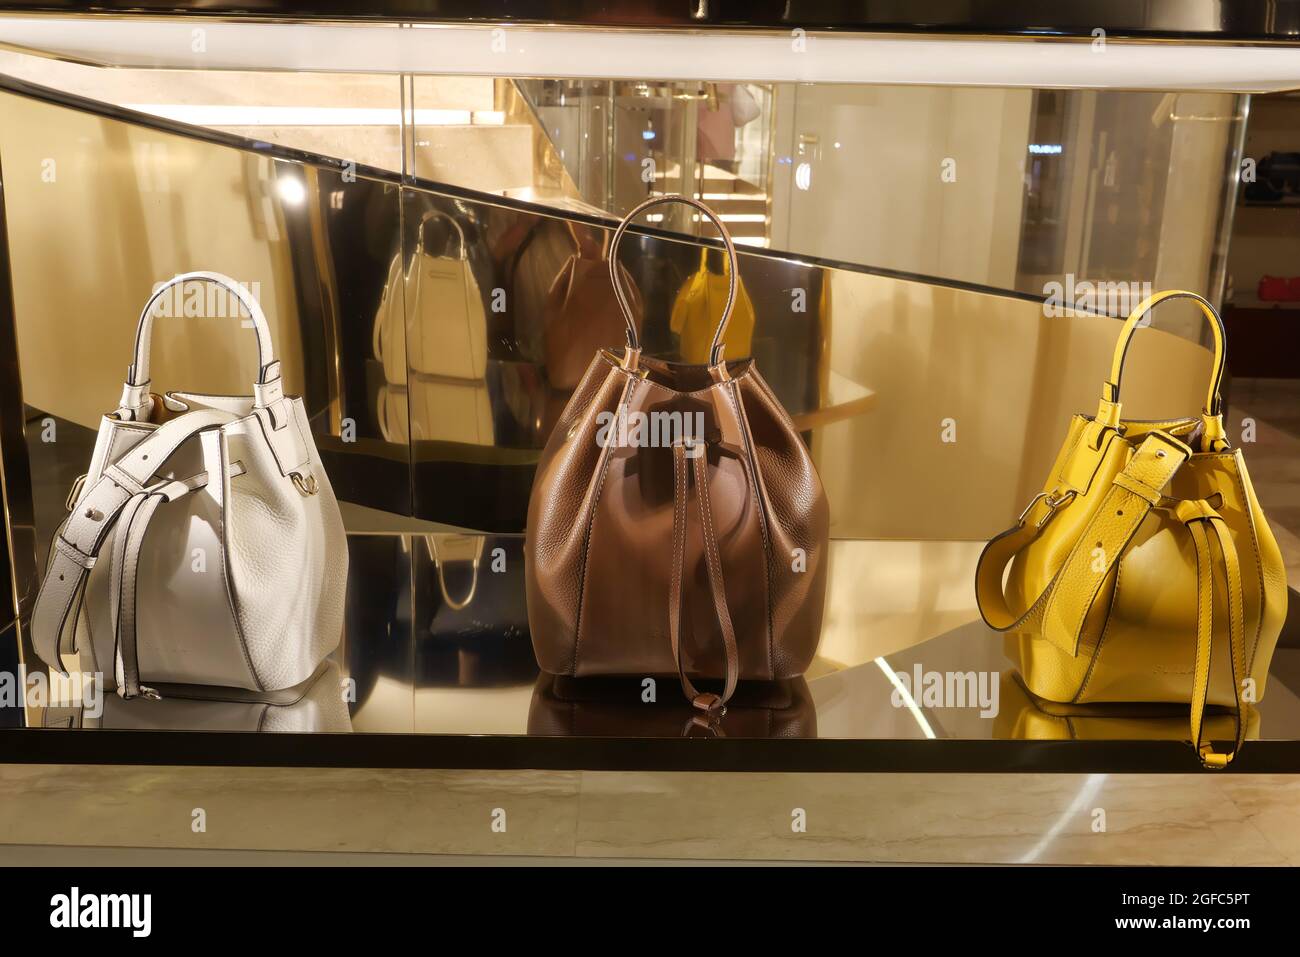 BAGS ON DISPLAY AT FURLA FASHION BOUTIQUE Stock Photo - Alamy